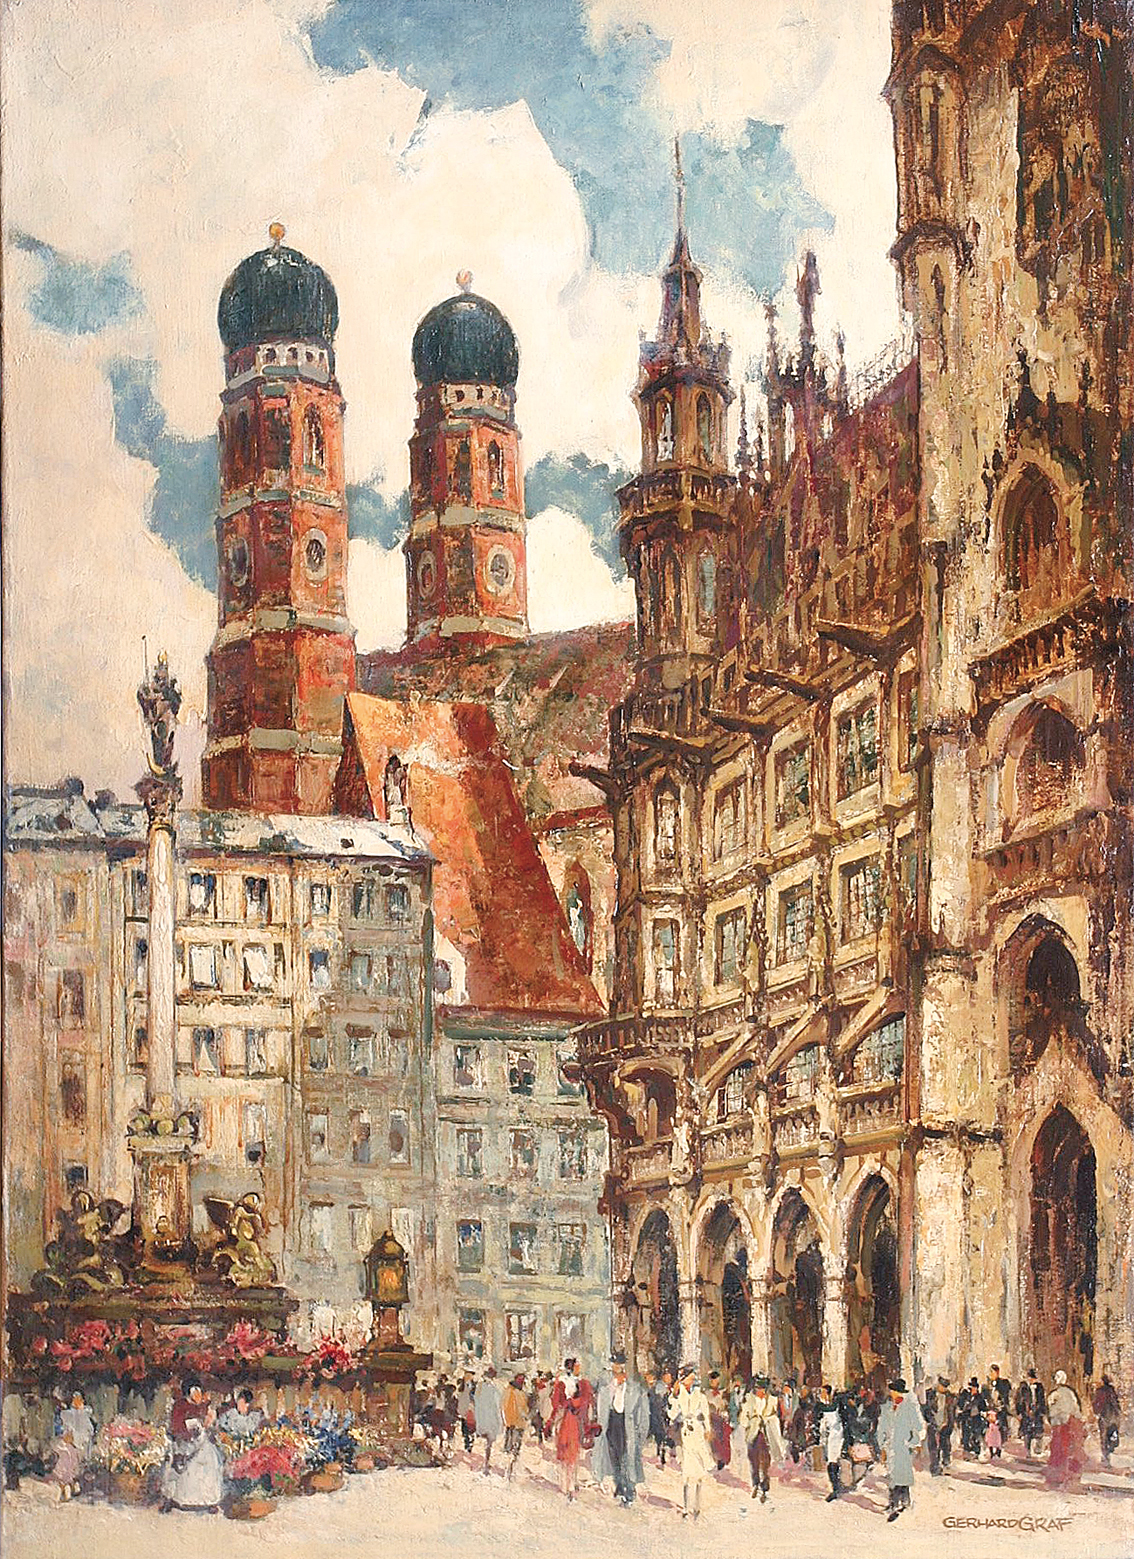 The church of our lady and the town hall in Munich